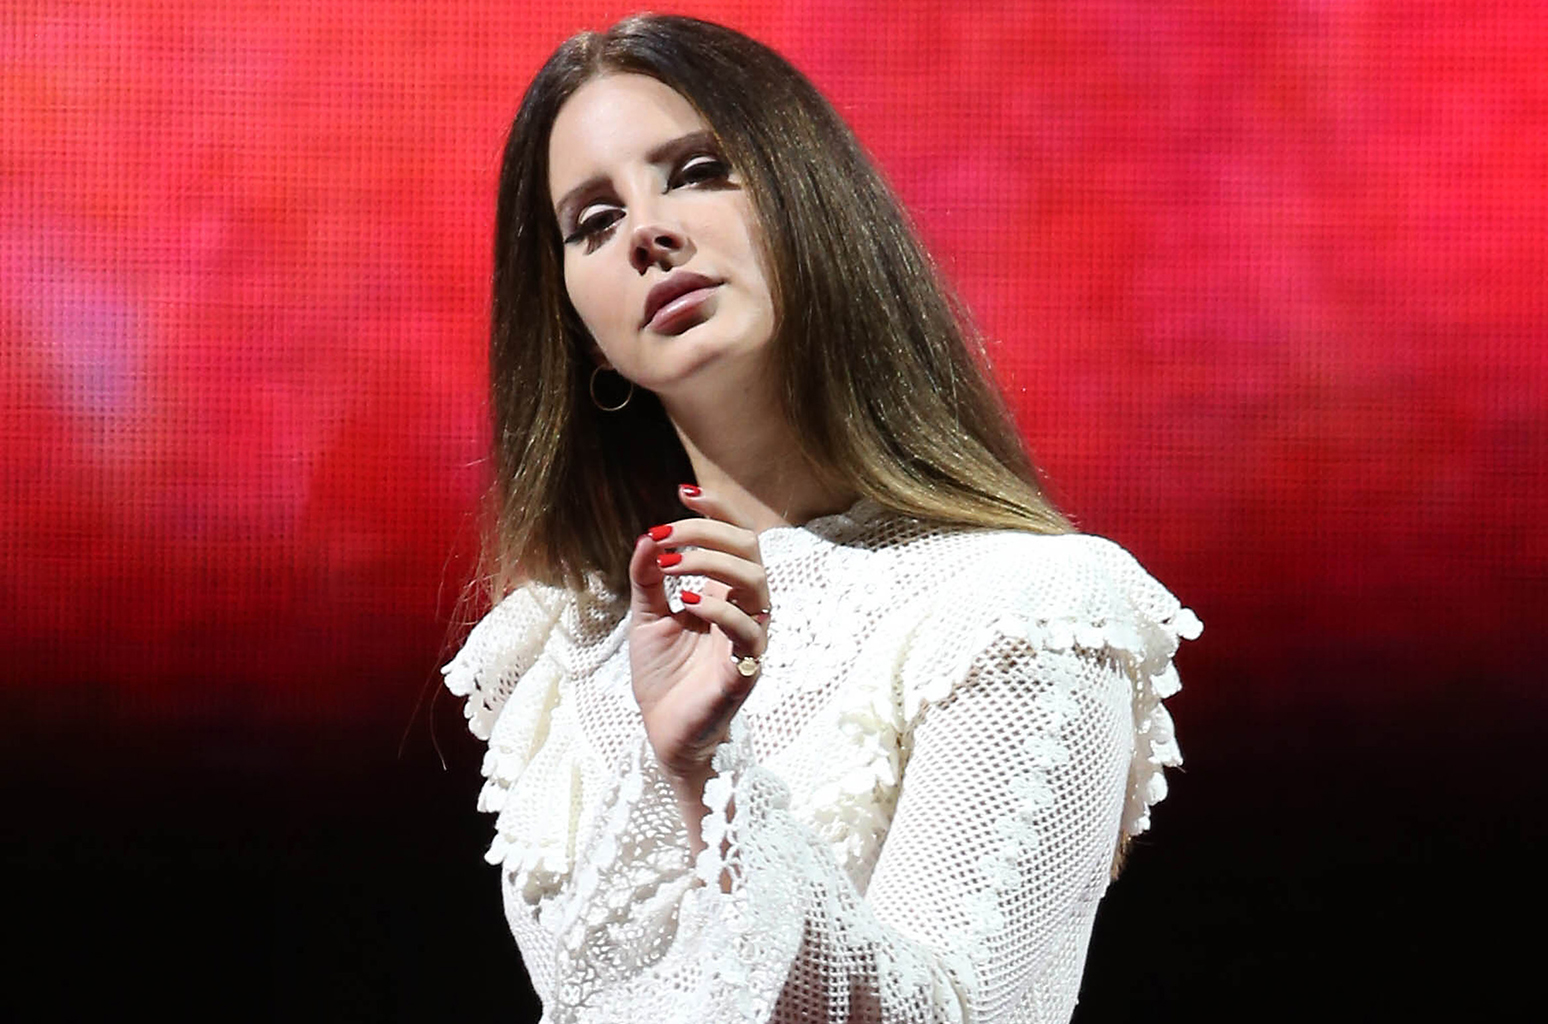 Lana Del Rey Is Delving Into Spoken Word With a 'Freestyle Poetry' Album - www.billboard.com - USA